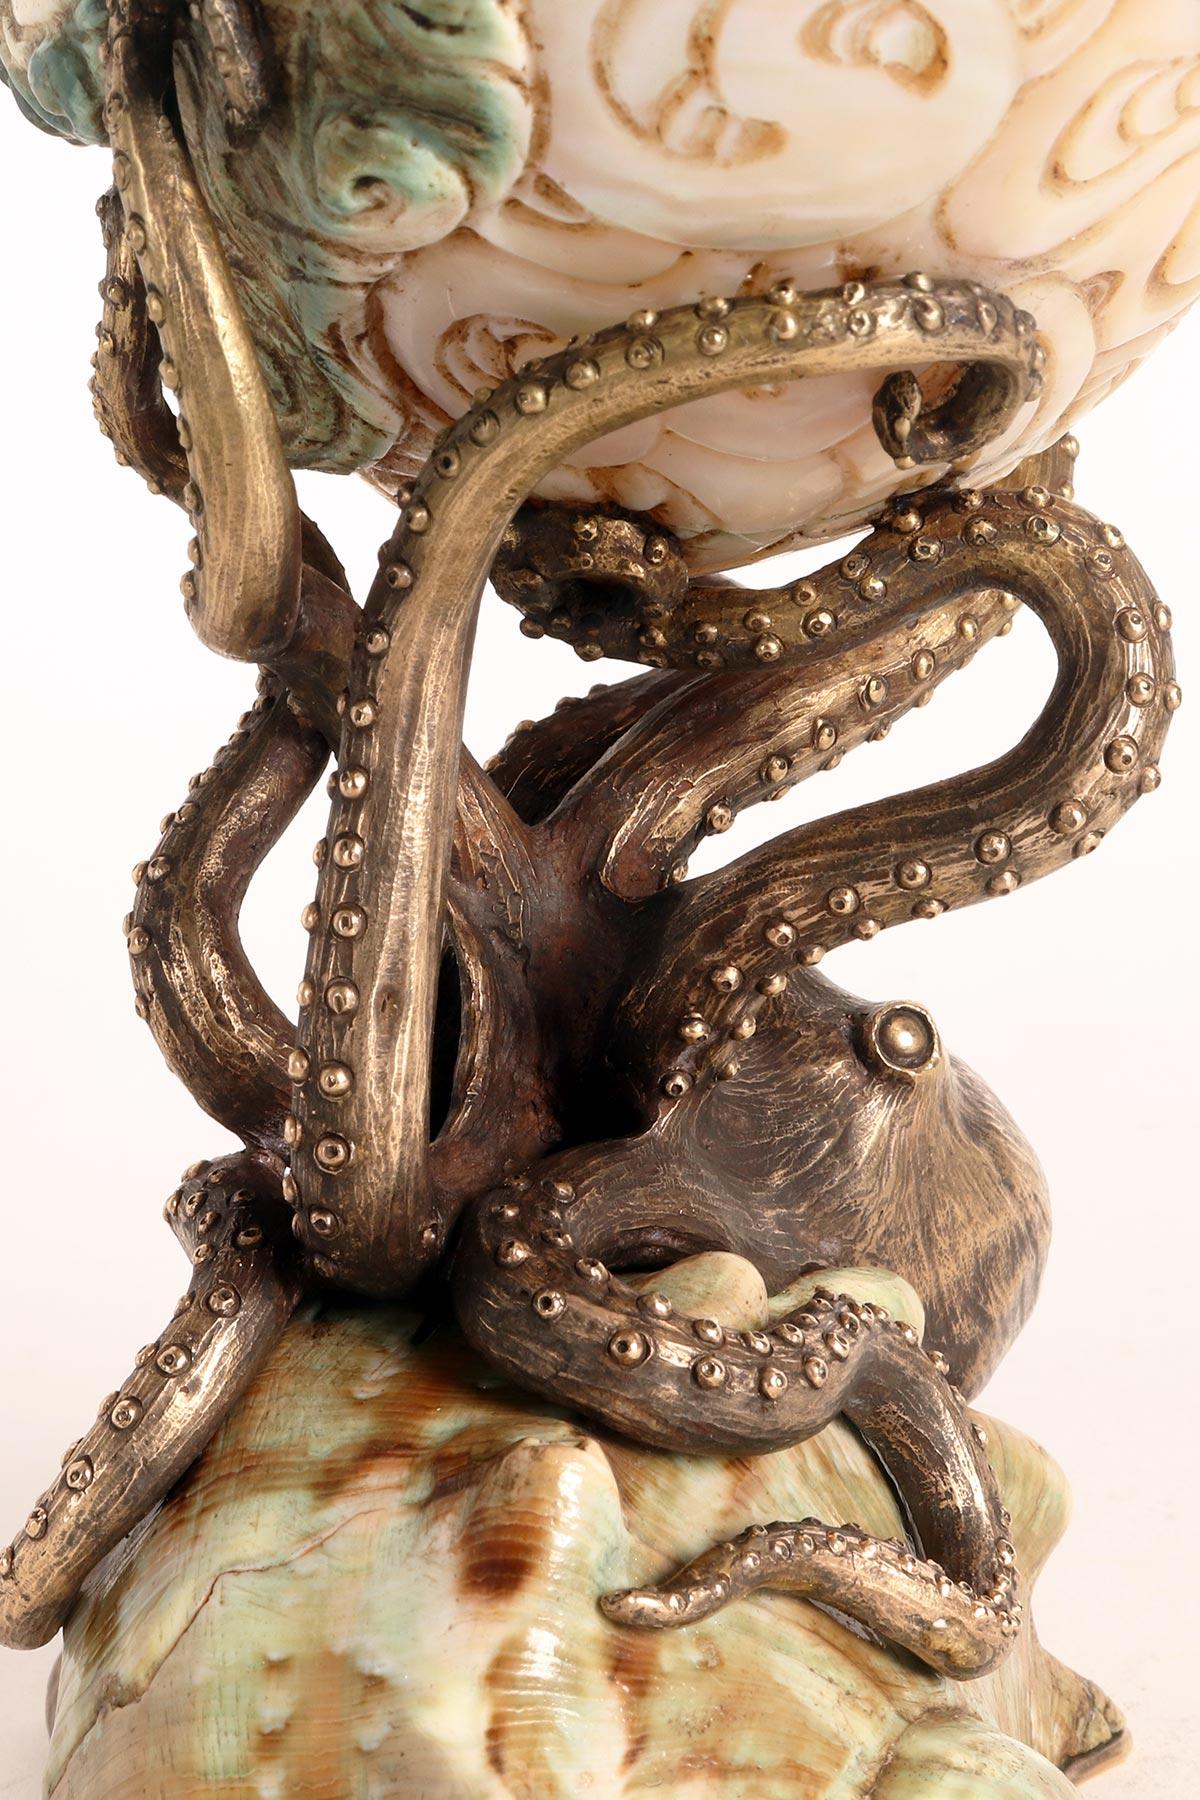 A cup with a shell of Turbo marmoratus, Germany 1870.  7